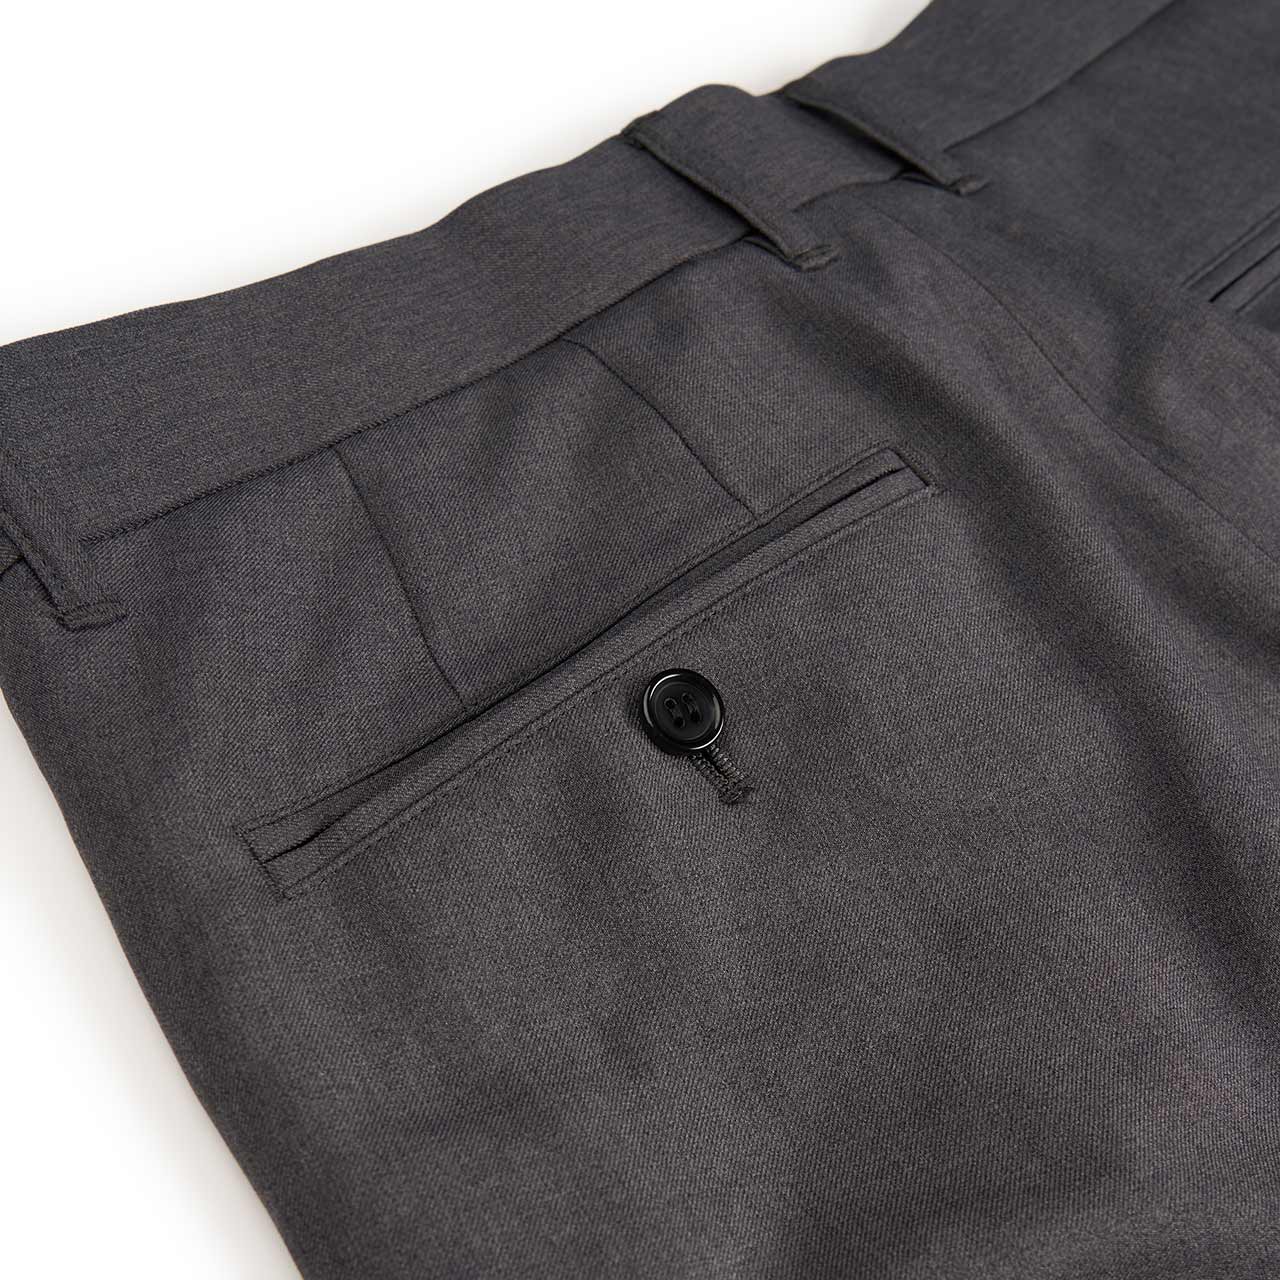 undercover undercover deconstructed panel dress pants (grey)